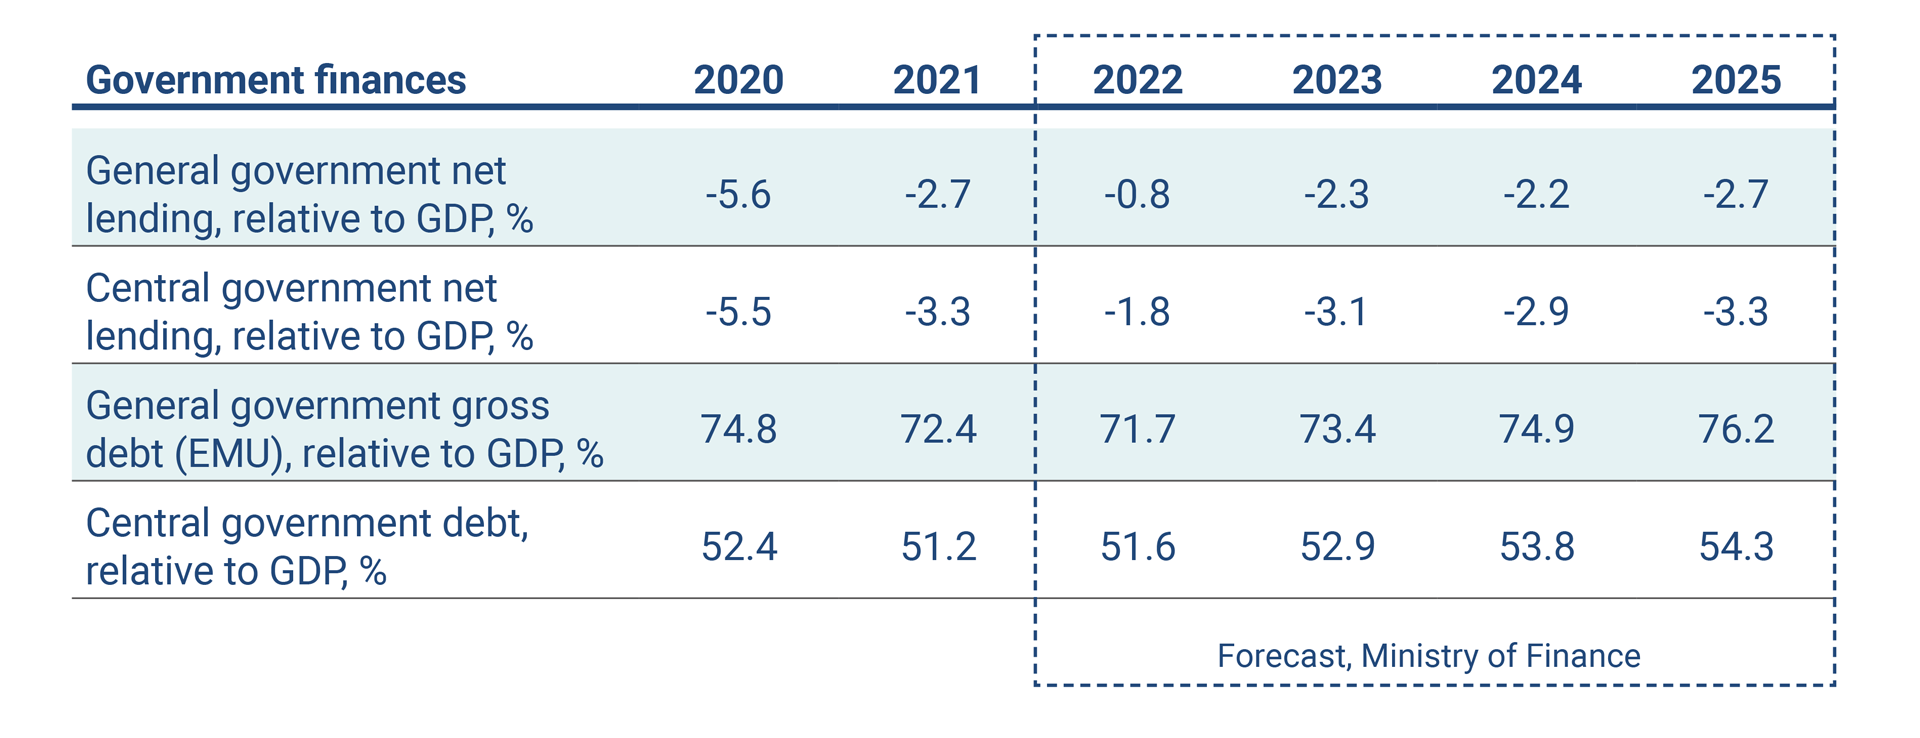 The table shows the key figures of government finances in 2020-2025.